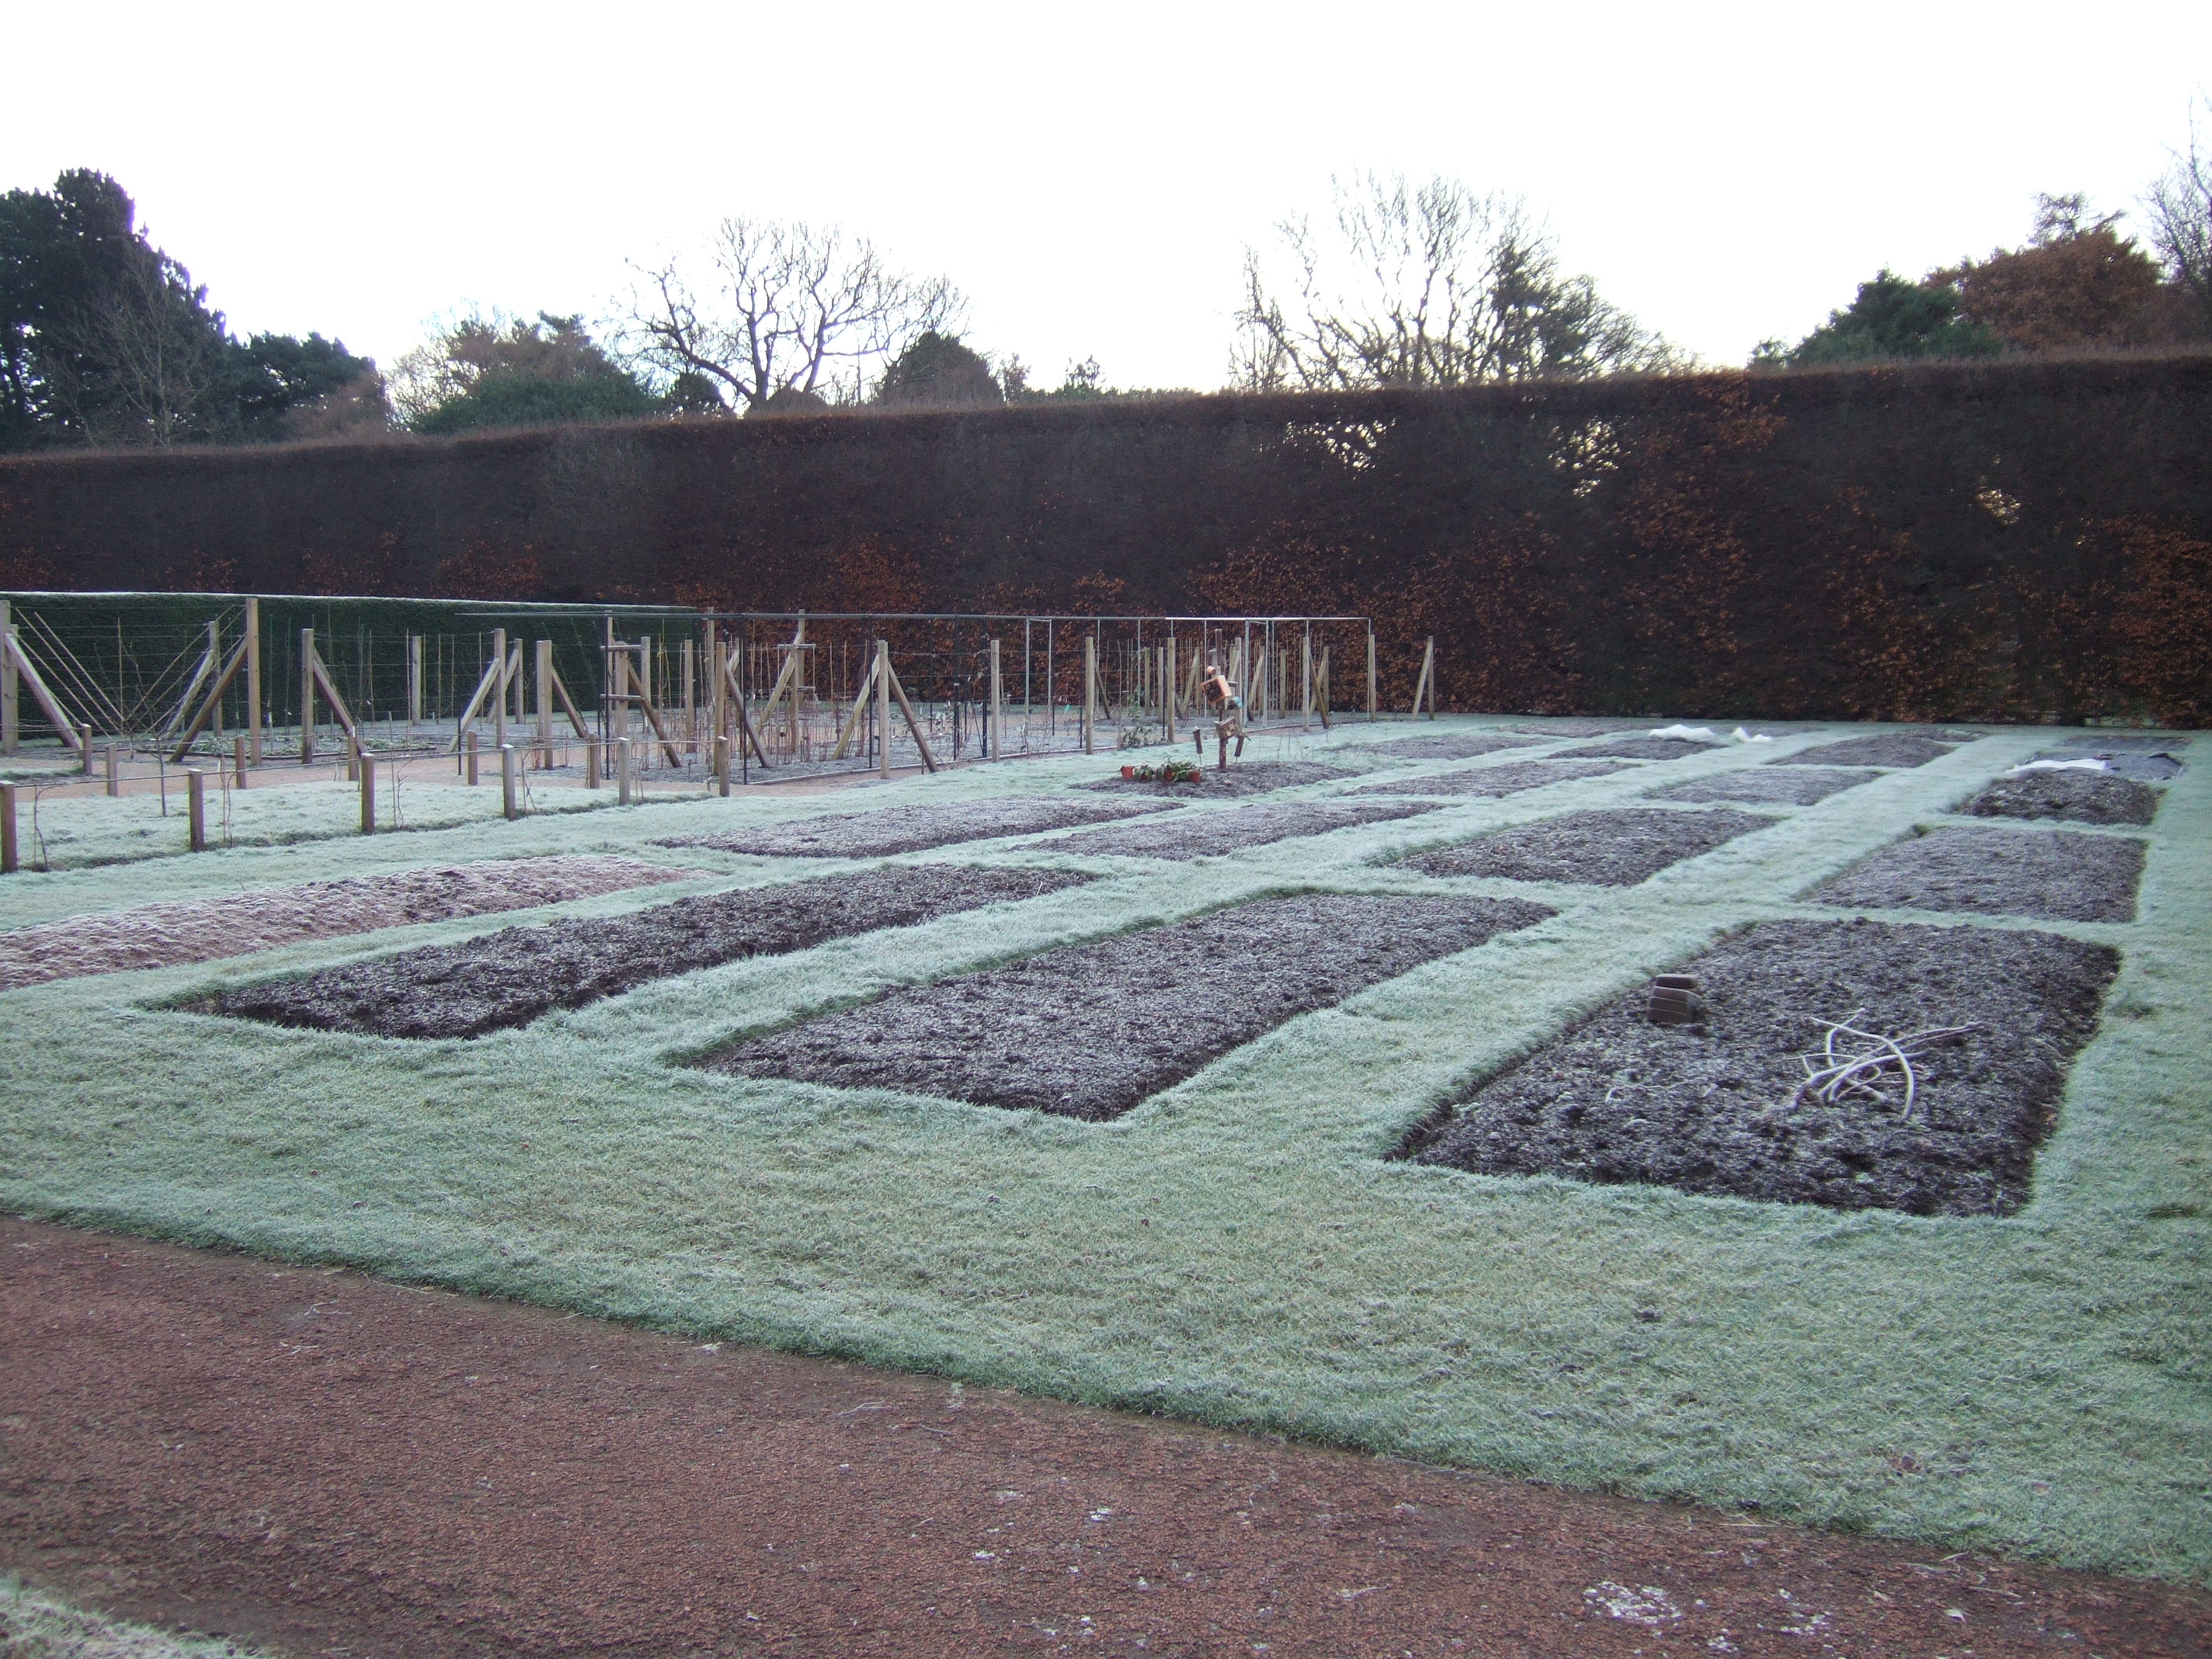 The plots in January 2013